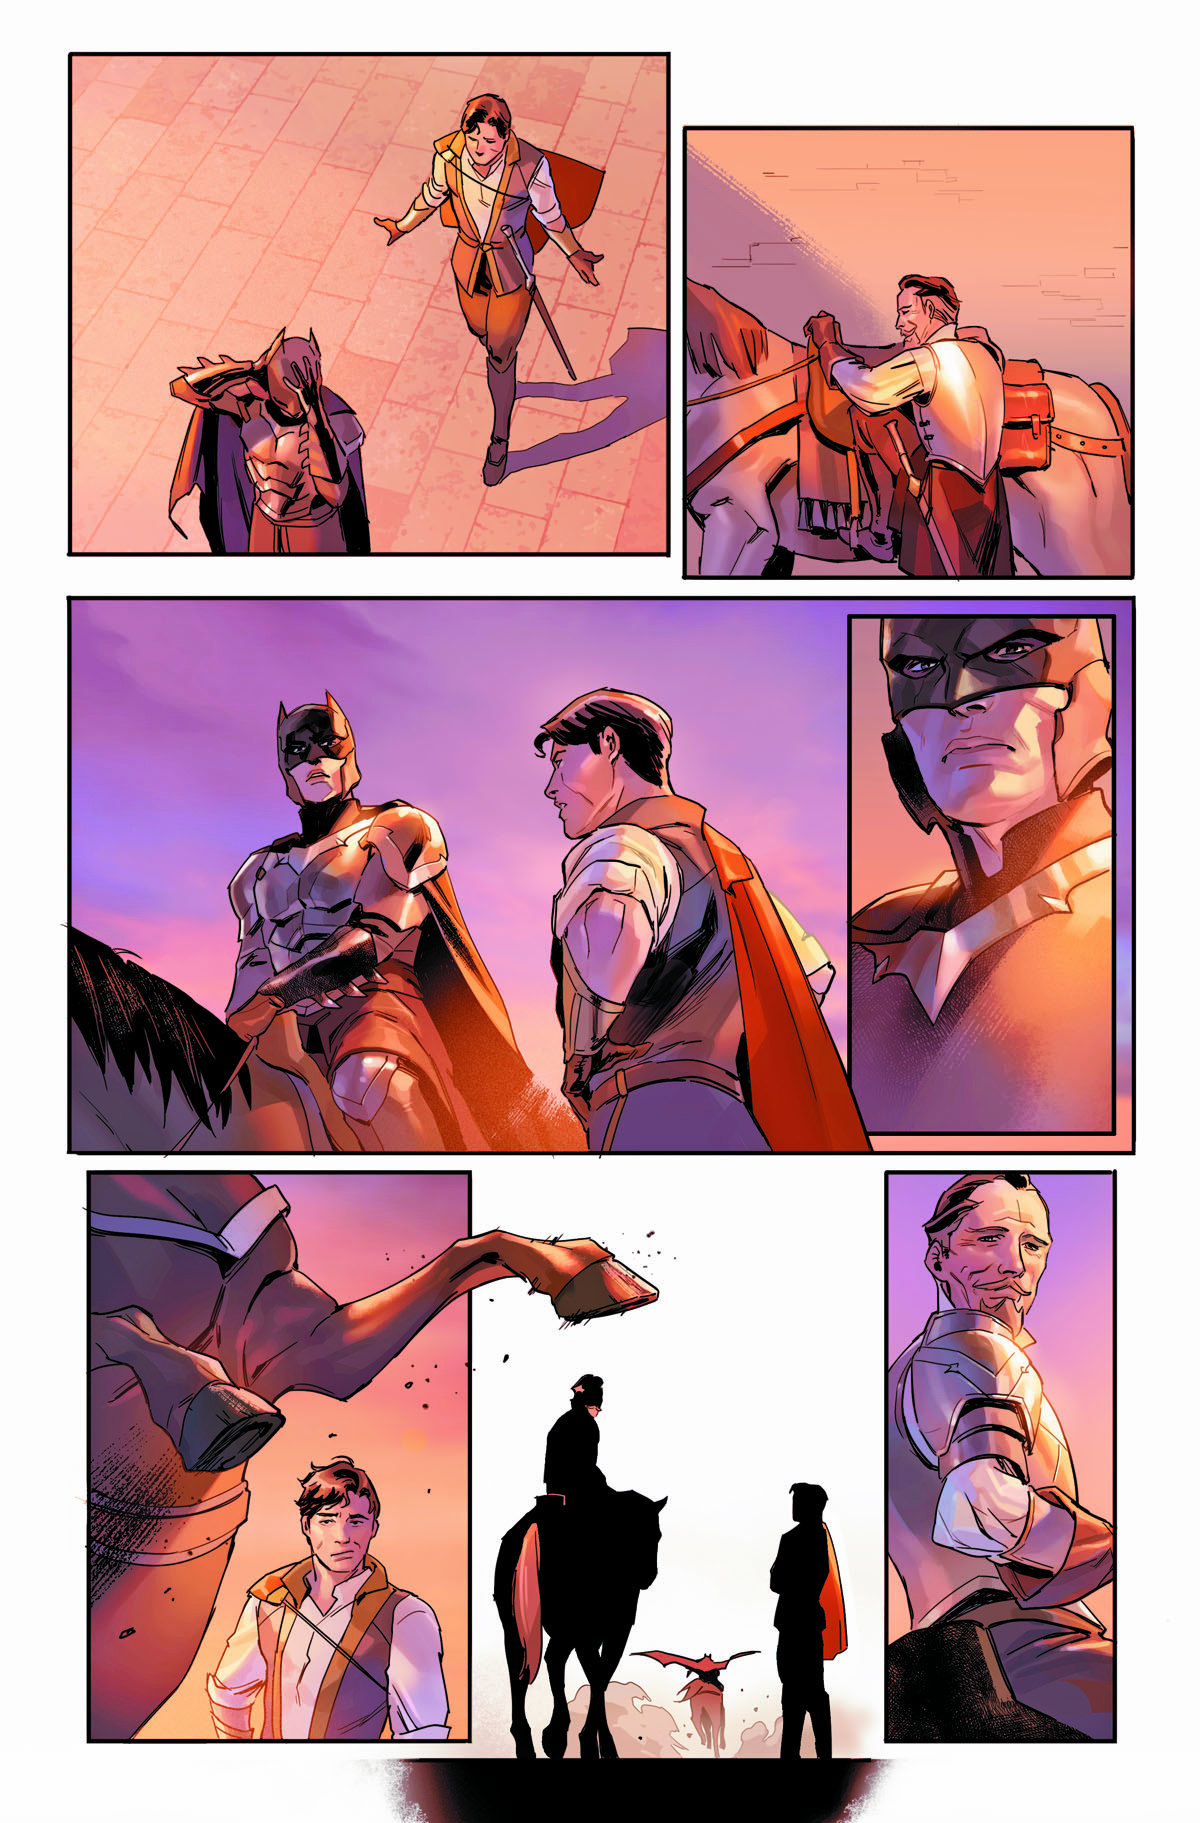 Dark Knights of Steel #1 preview page 3